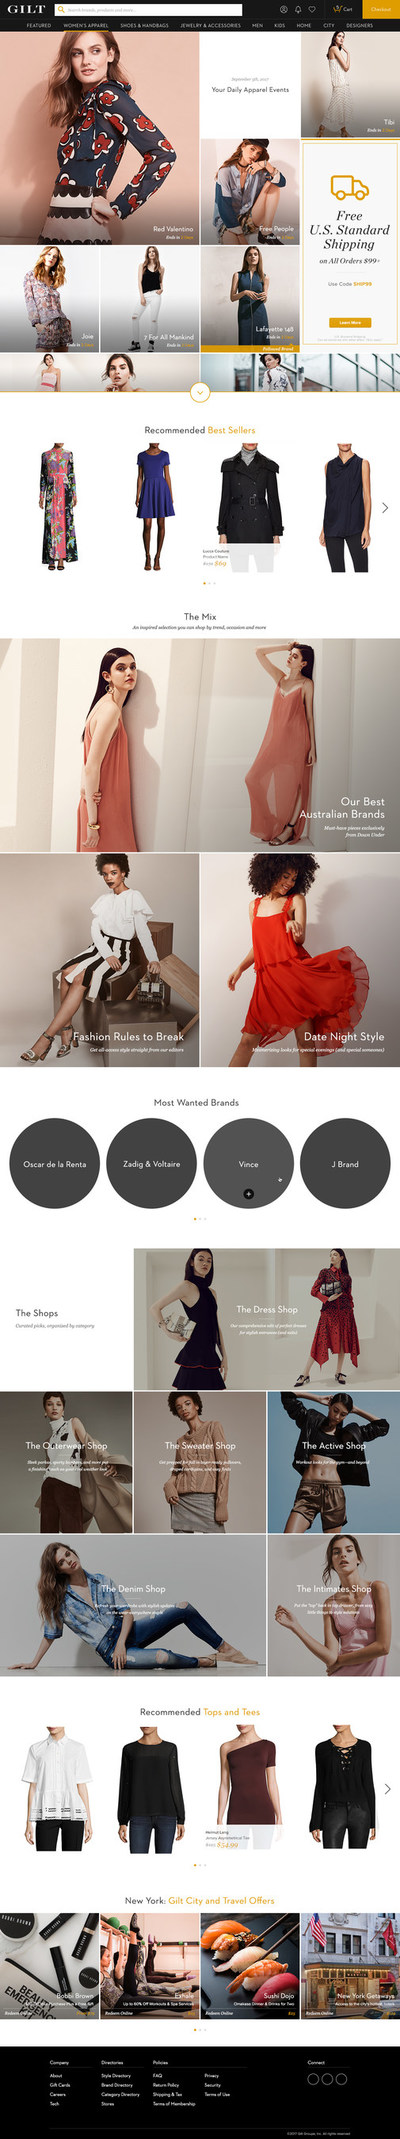 Gilt's redesigned women's category page